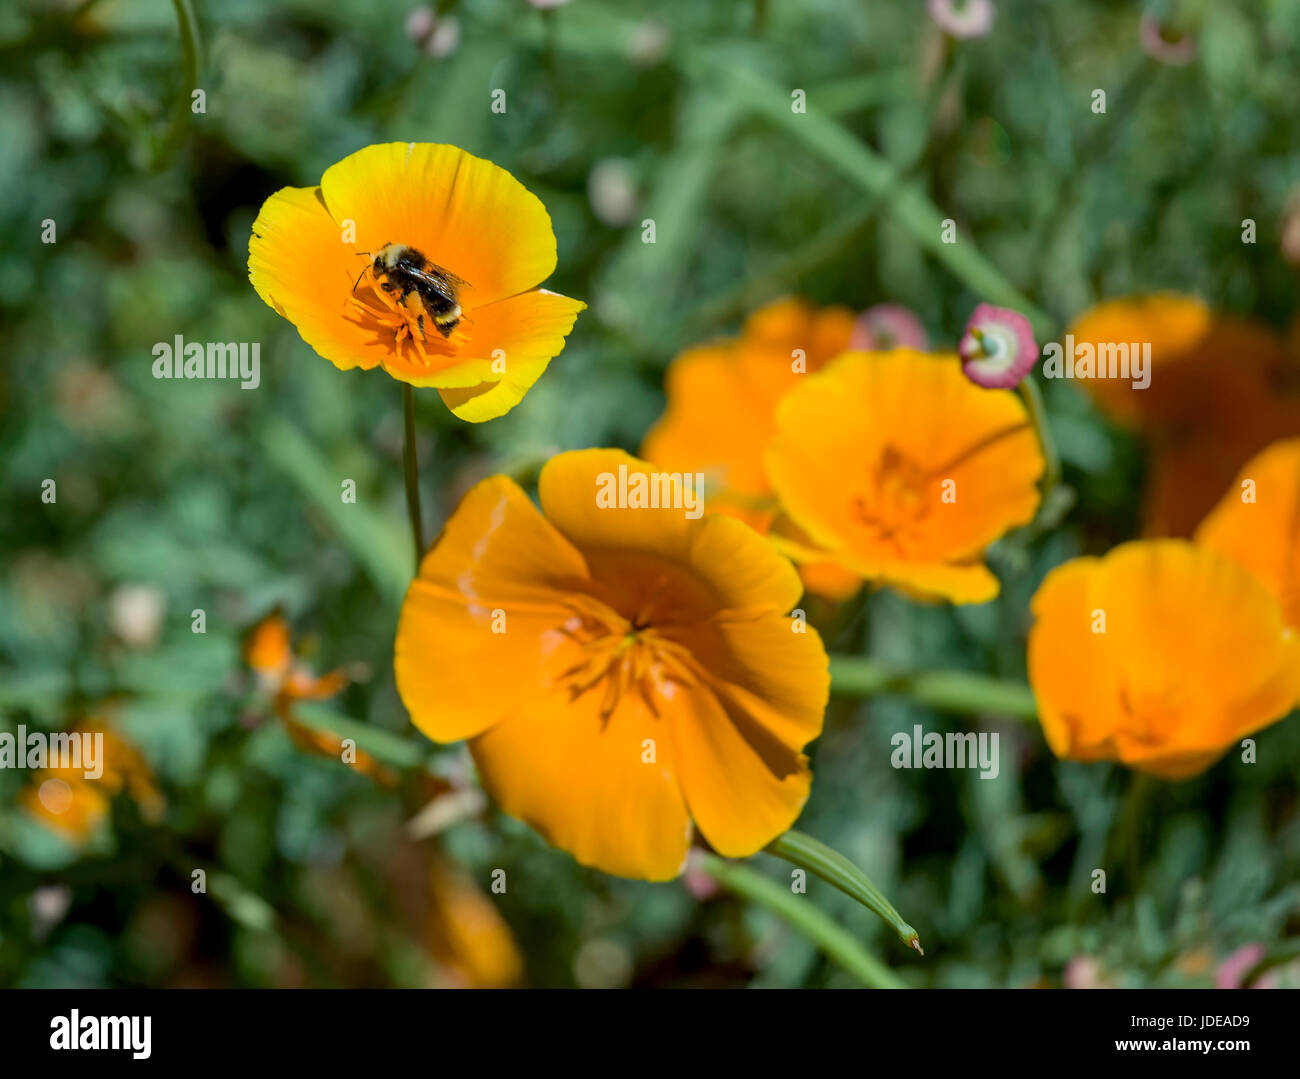 This photo was taken at a formal botanical garden near San Francisco, California. Spring had arrived, and flowers are in bloom. This image features a  Stock Photo